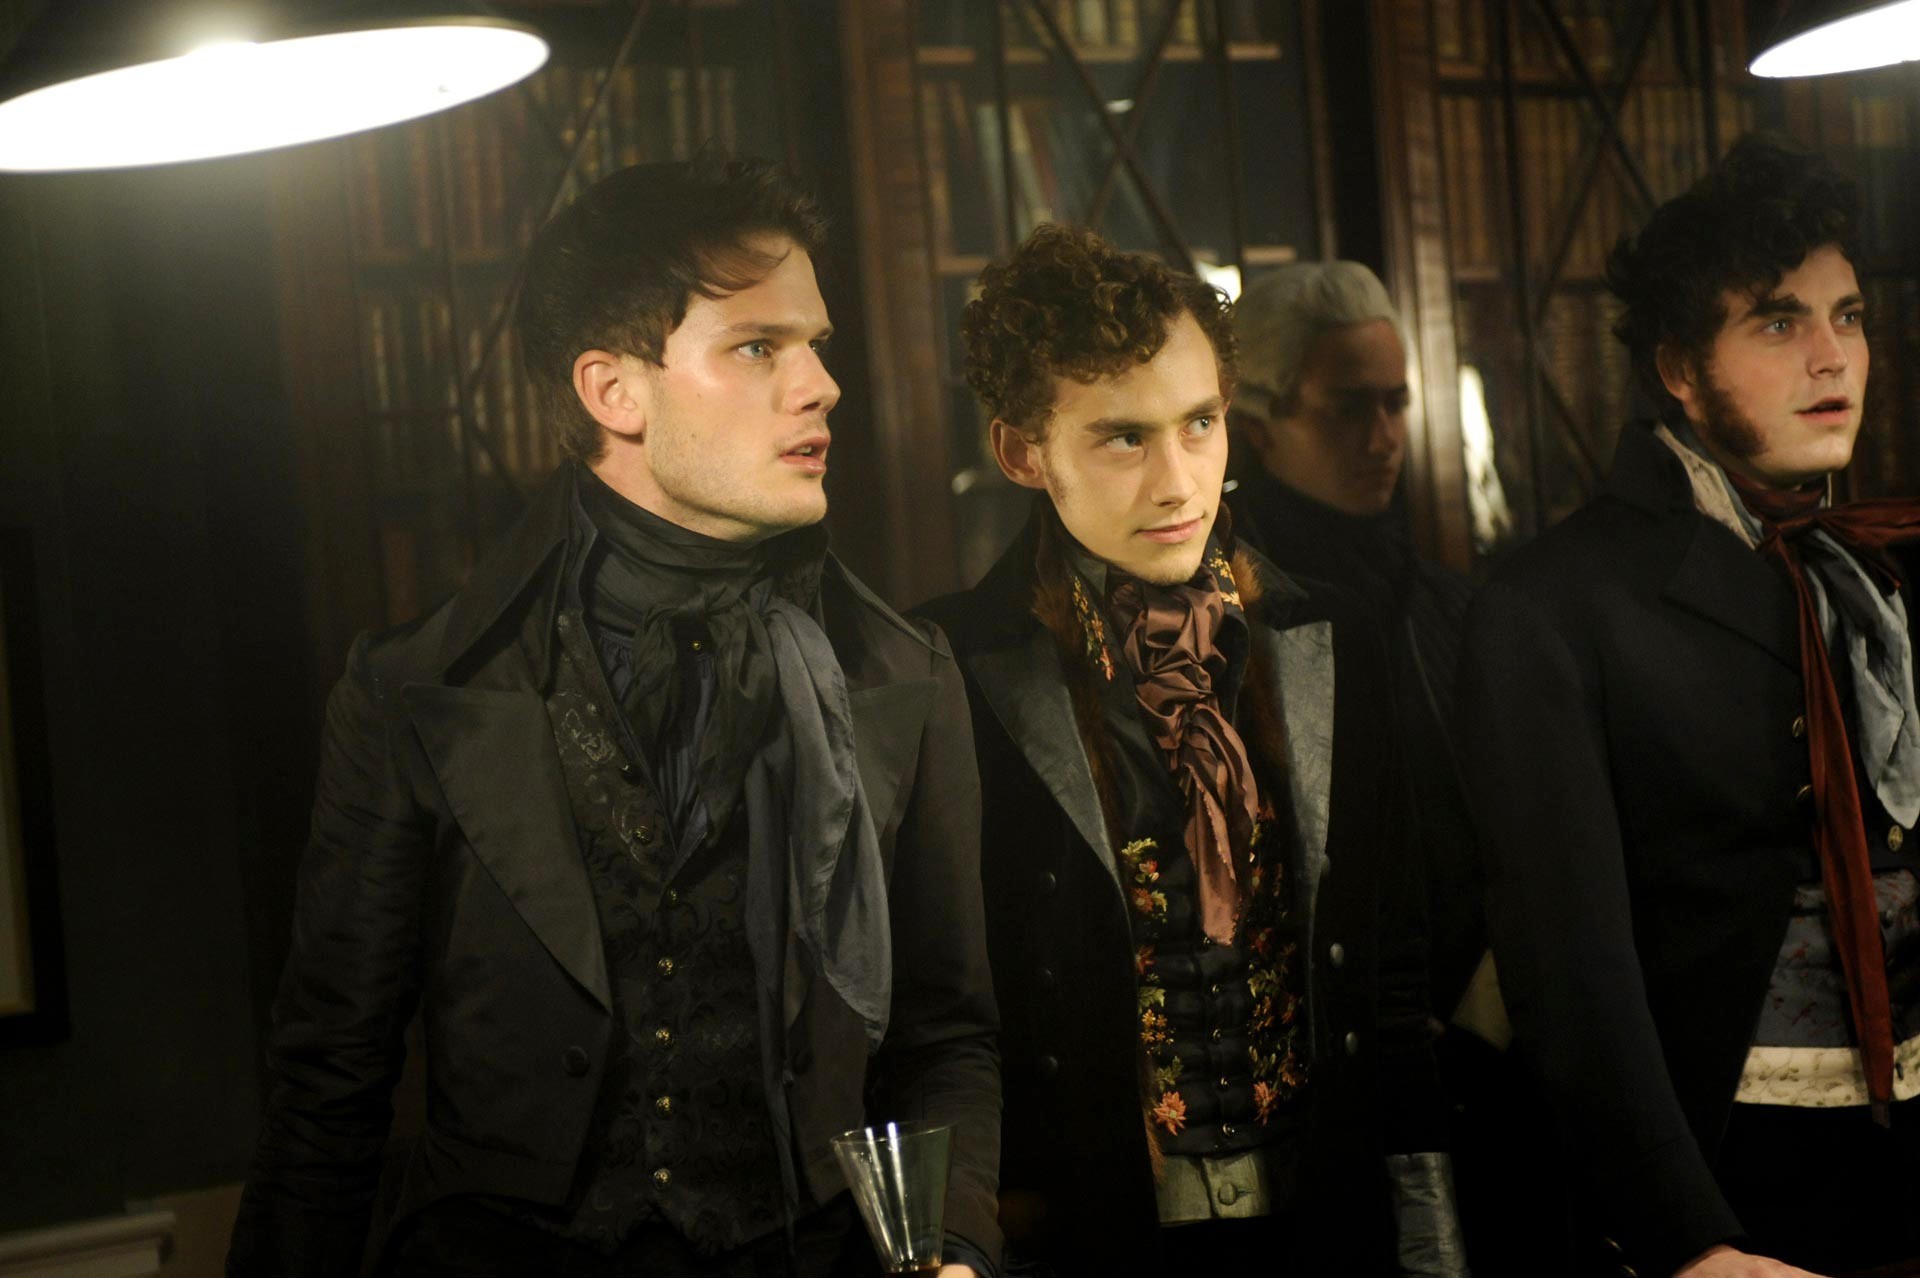 Jeremy Irvine stars as Pip and Olly Alexander stars as Herbert Pocket in Main Street Films' Great Expectations (2013)